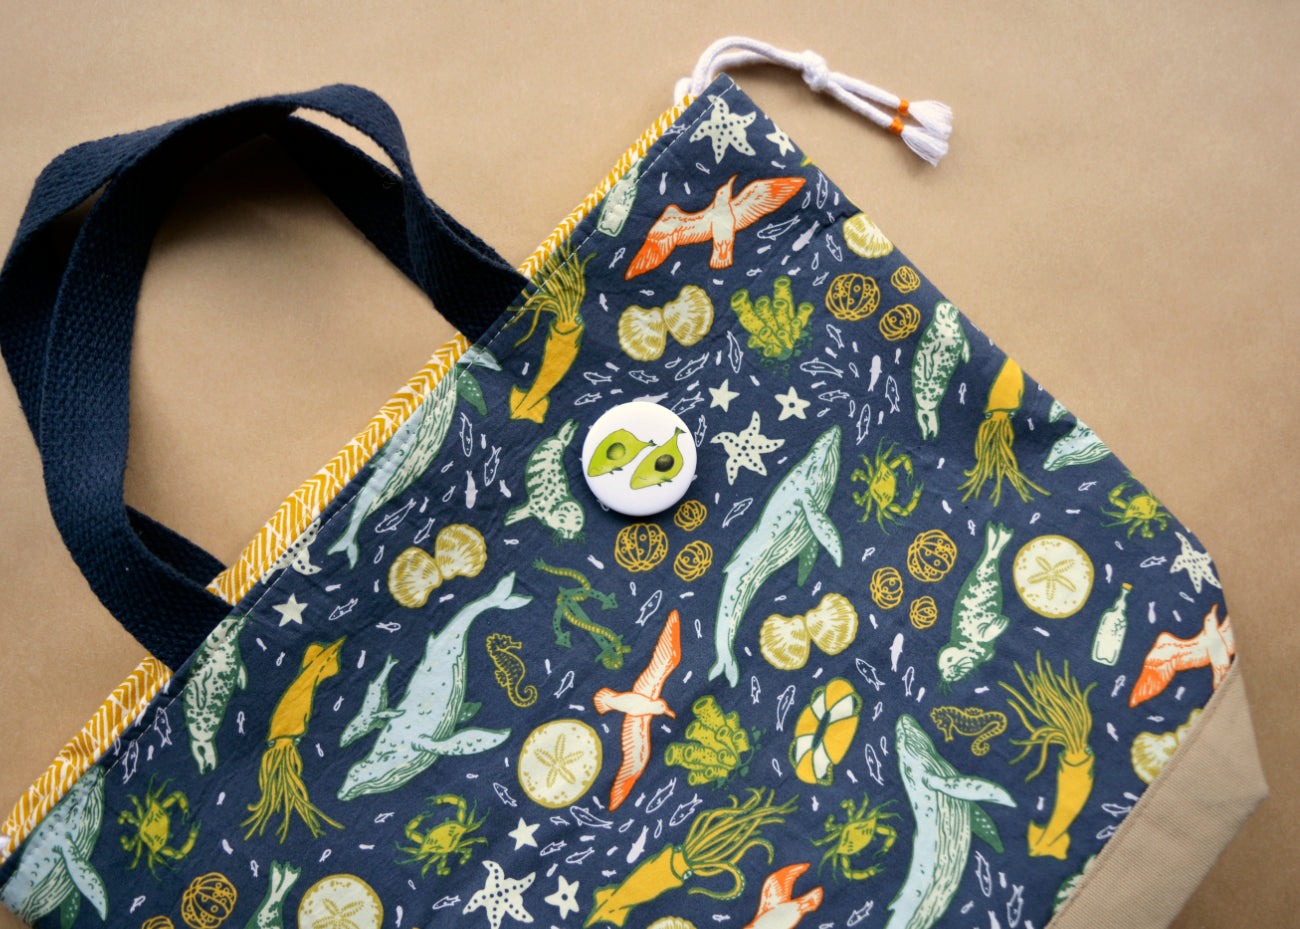 Pin back button with two imaginative "Avocado whales" on a cloth bag.